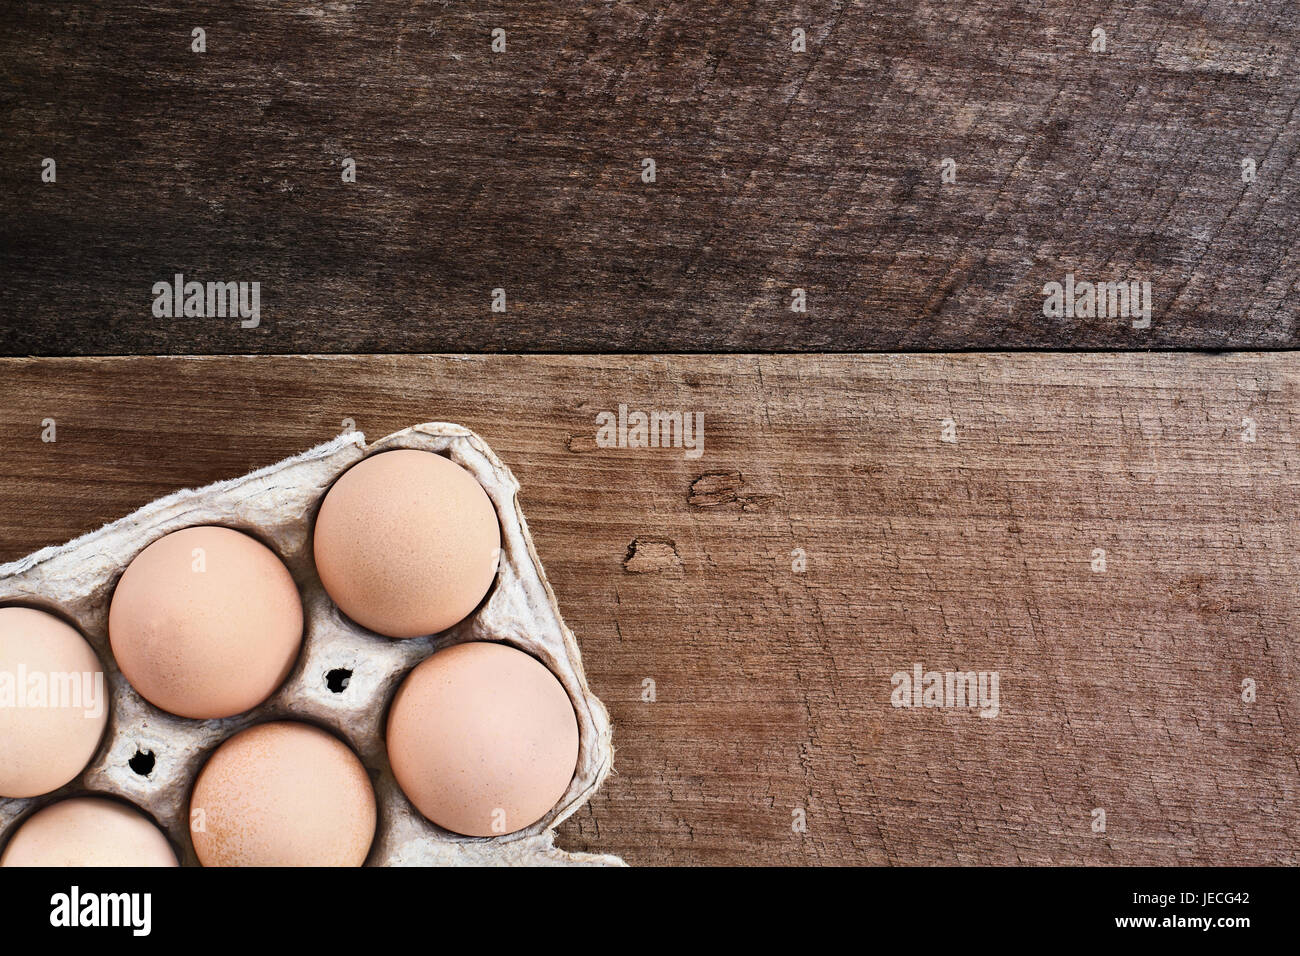 Farm fresh organic brown chicken eggs from free range chickens with in a paper carton over a rustic wooden background. Stock Photo